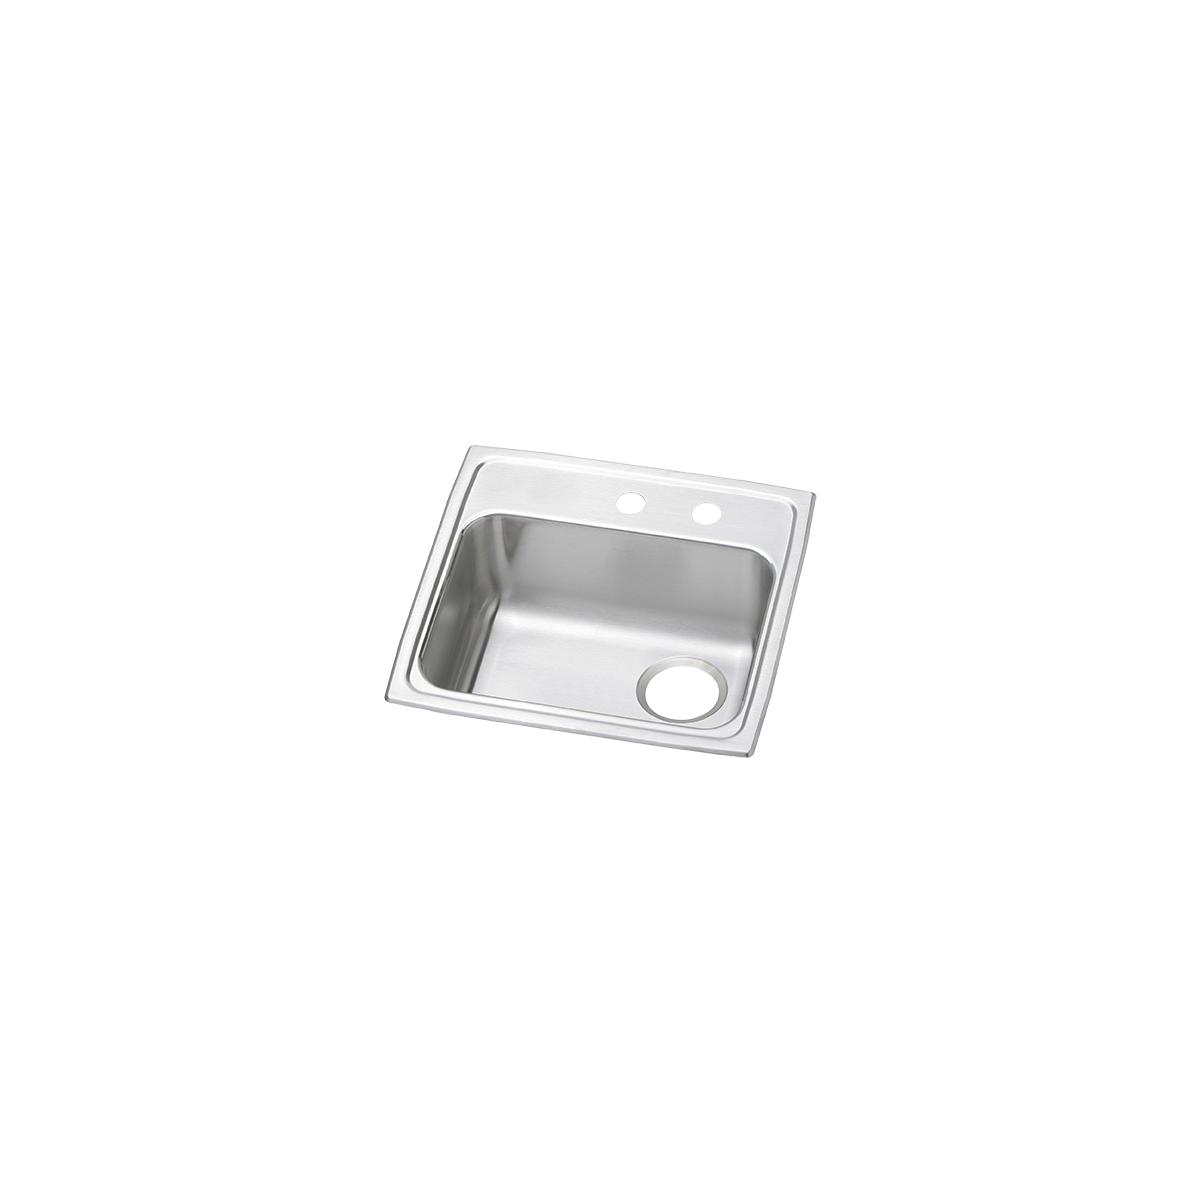 Elkay Celebrity 19-1/2" x 19" x 5-1/2" MR2-Hole Single Bowl Drop-in ADA Sink with Quick-clip and Right Drain